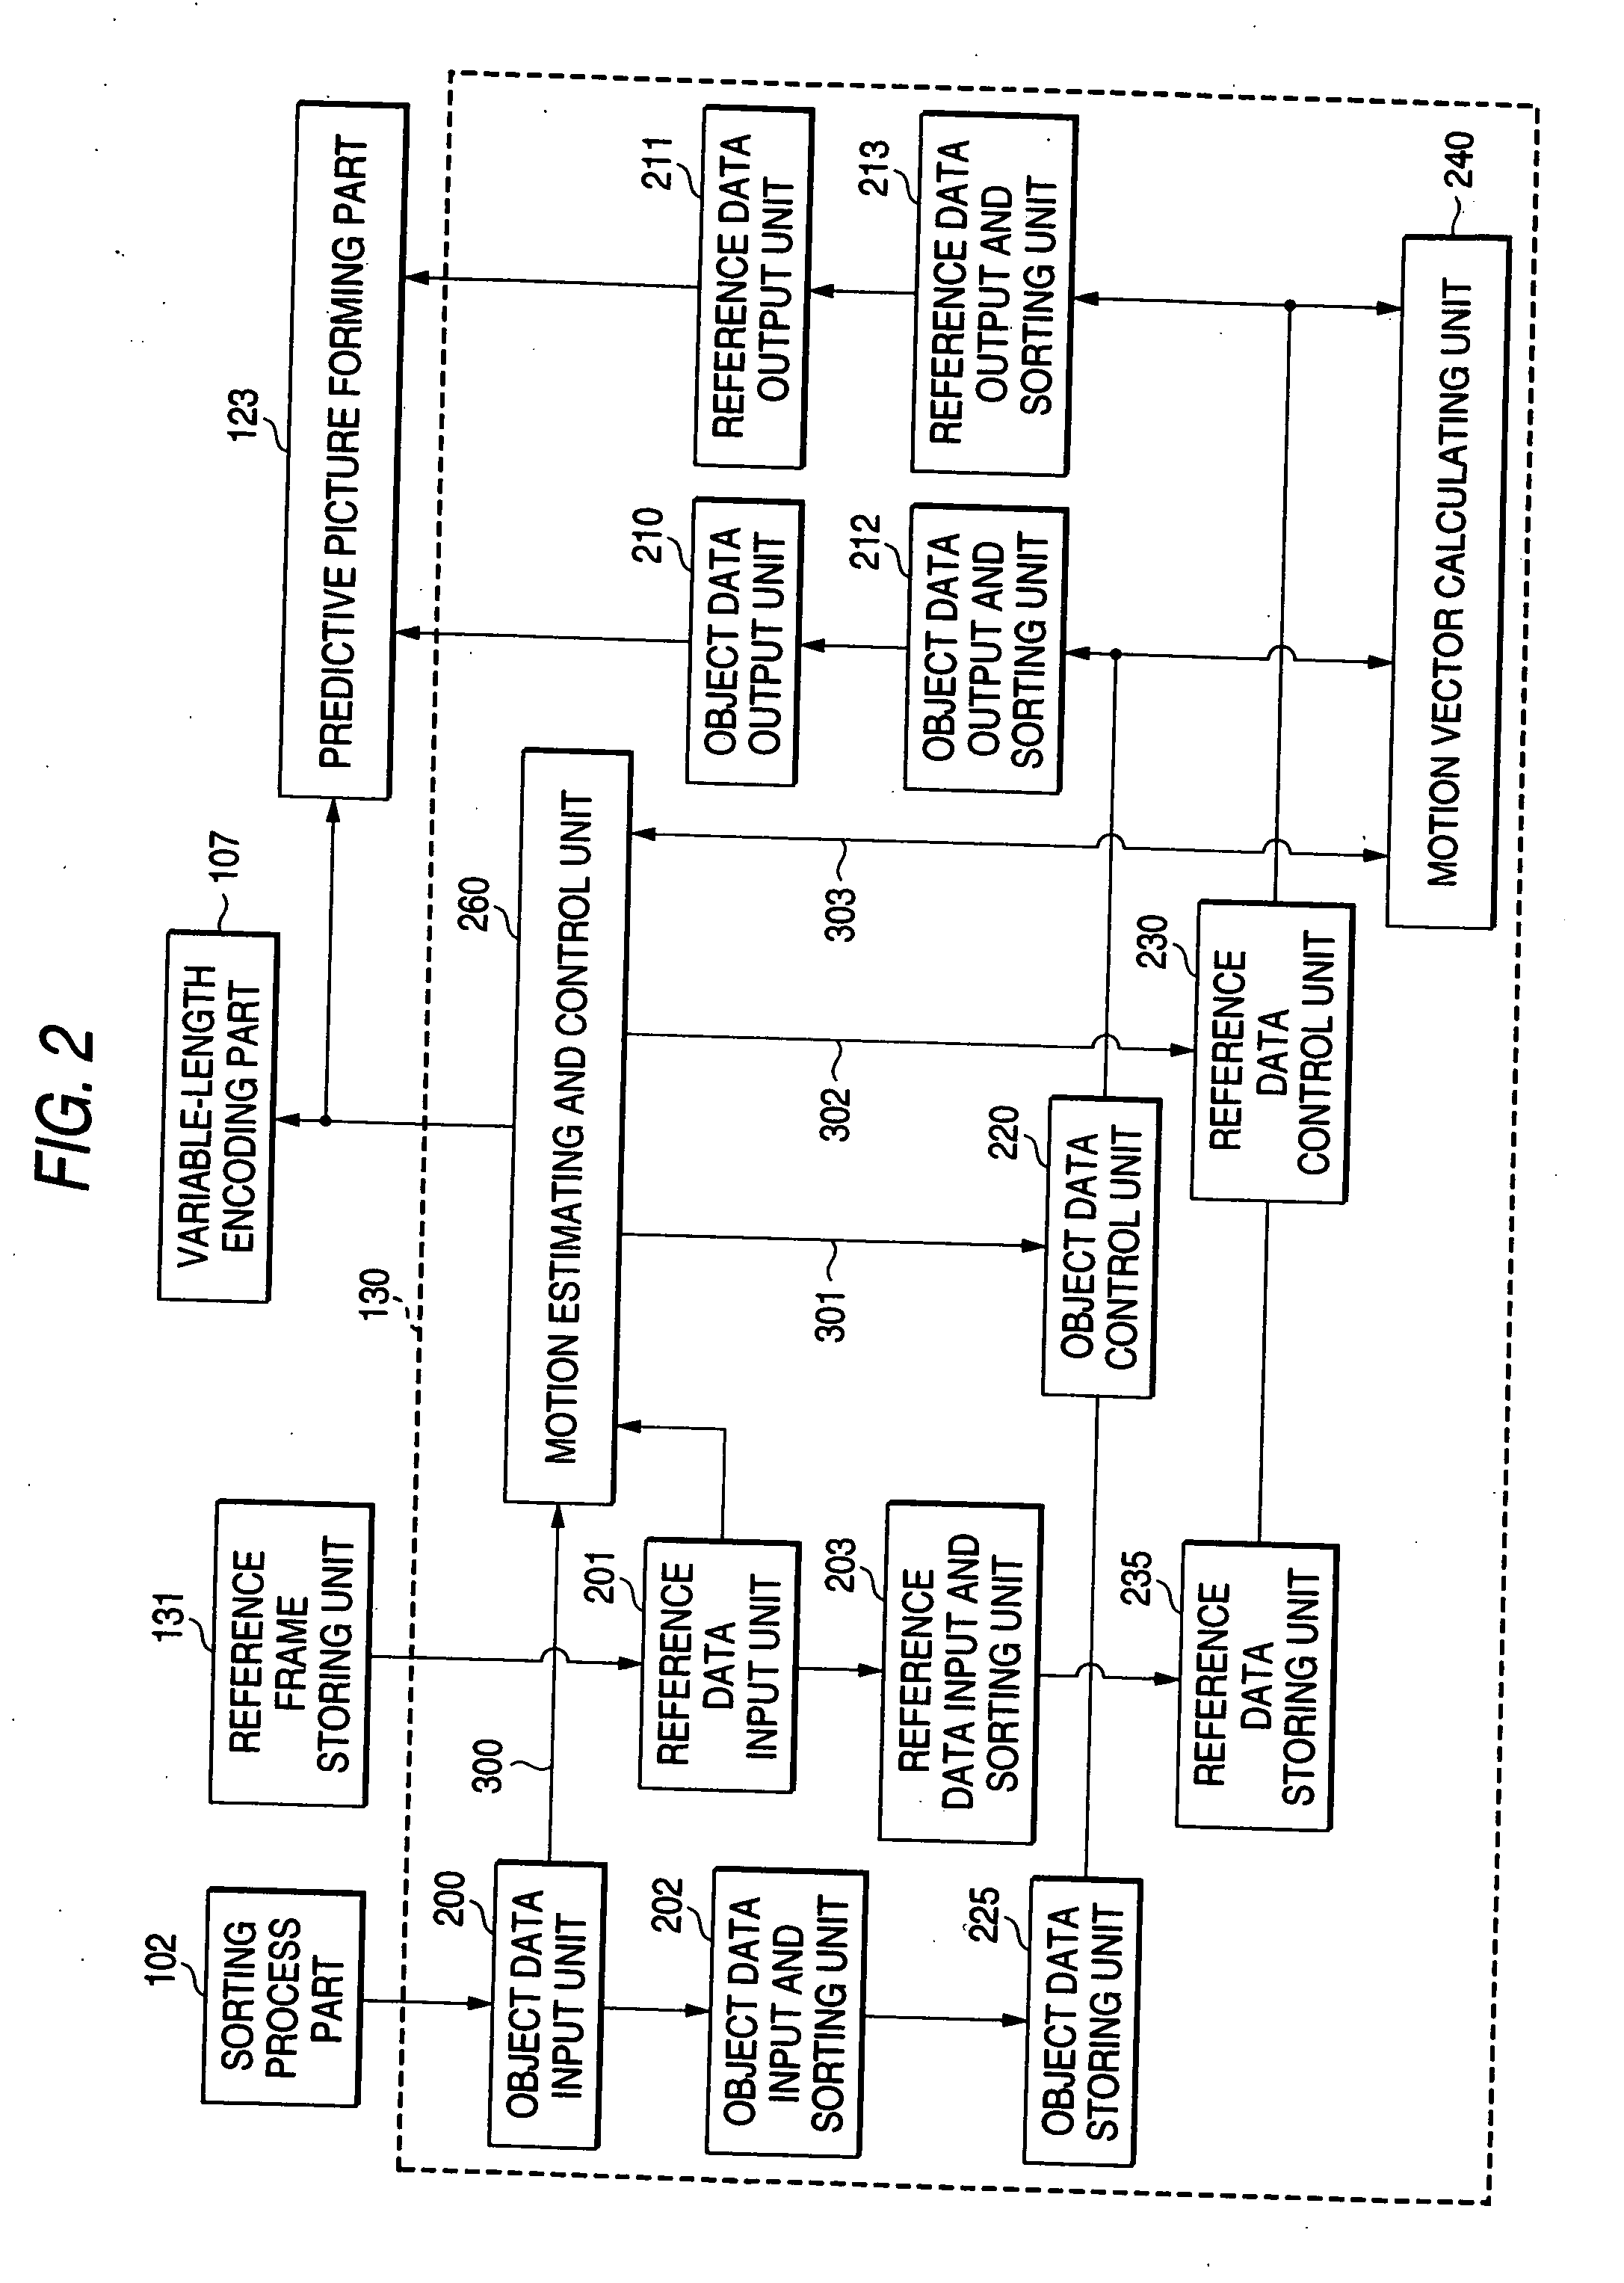 Motion vector estimating method and motion picture processor